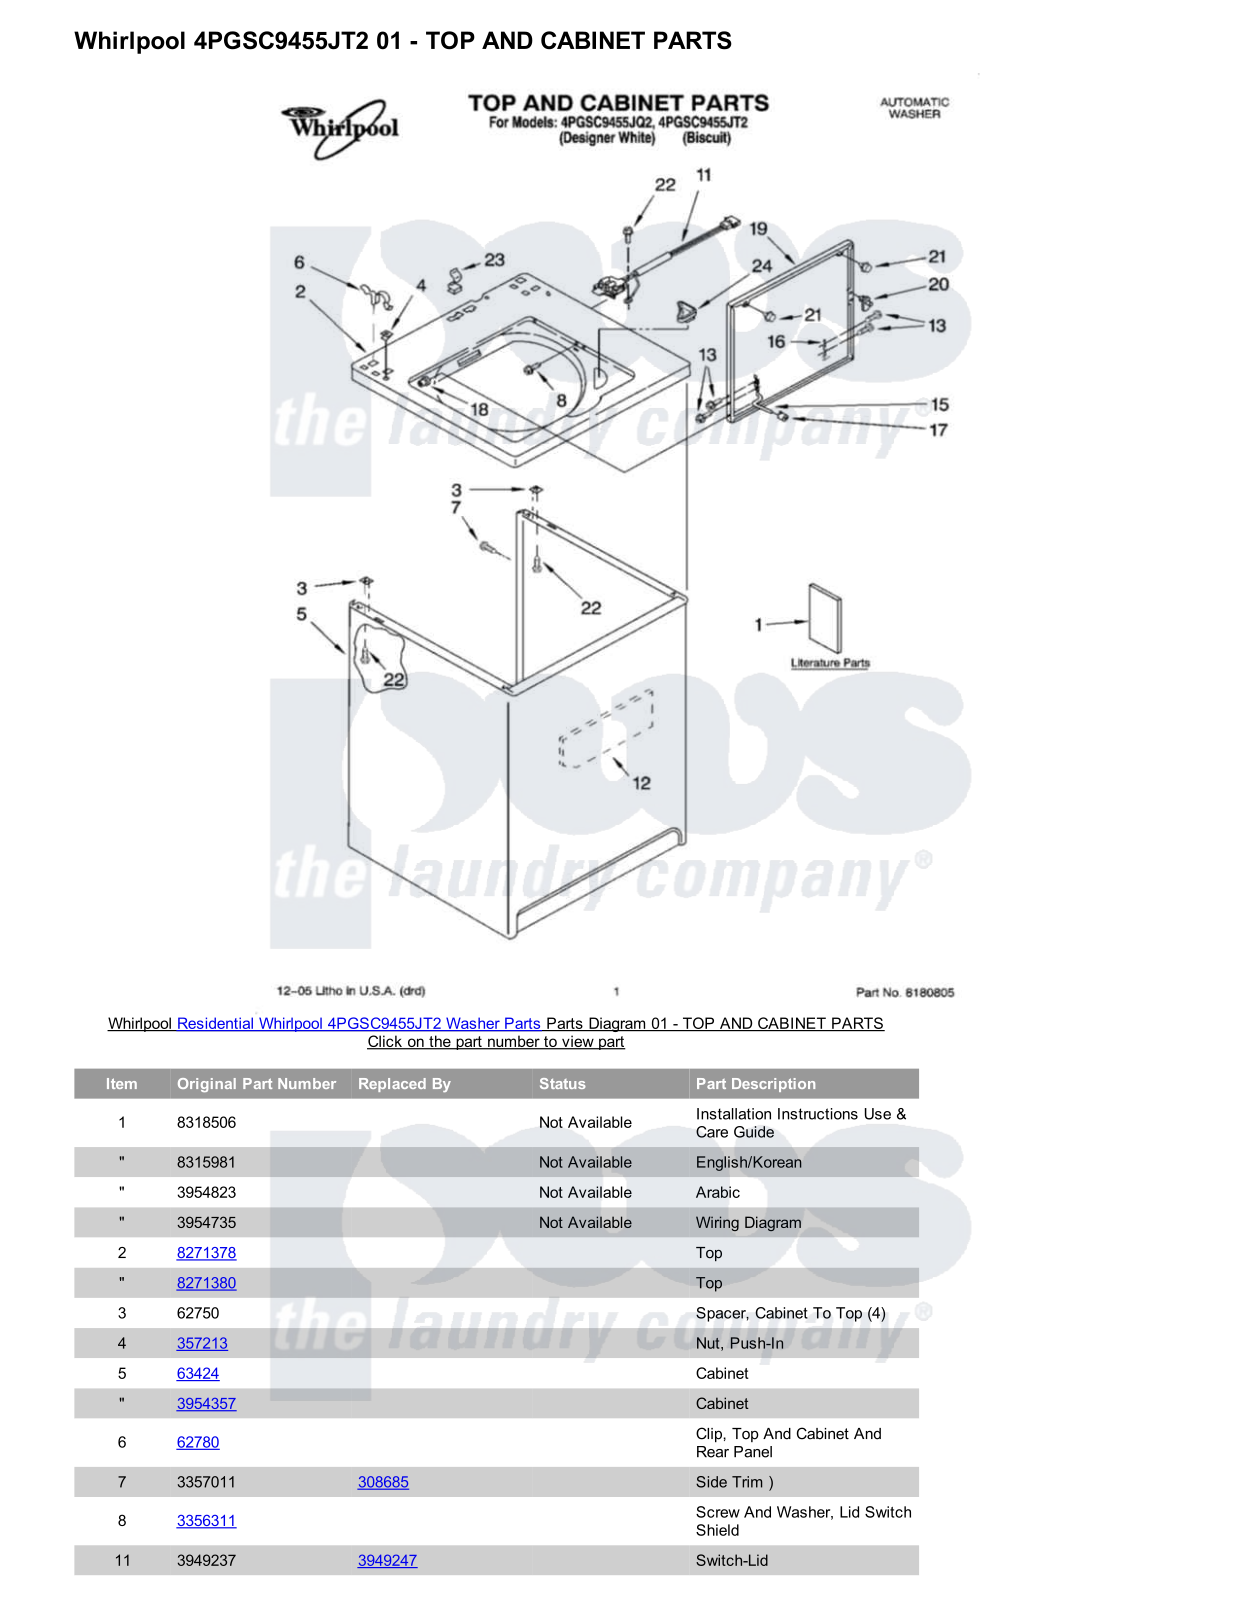 Whirlpool 4PGSC9455JT2 Parts Diagram